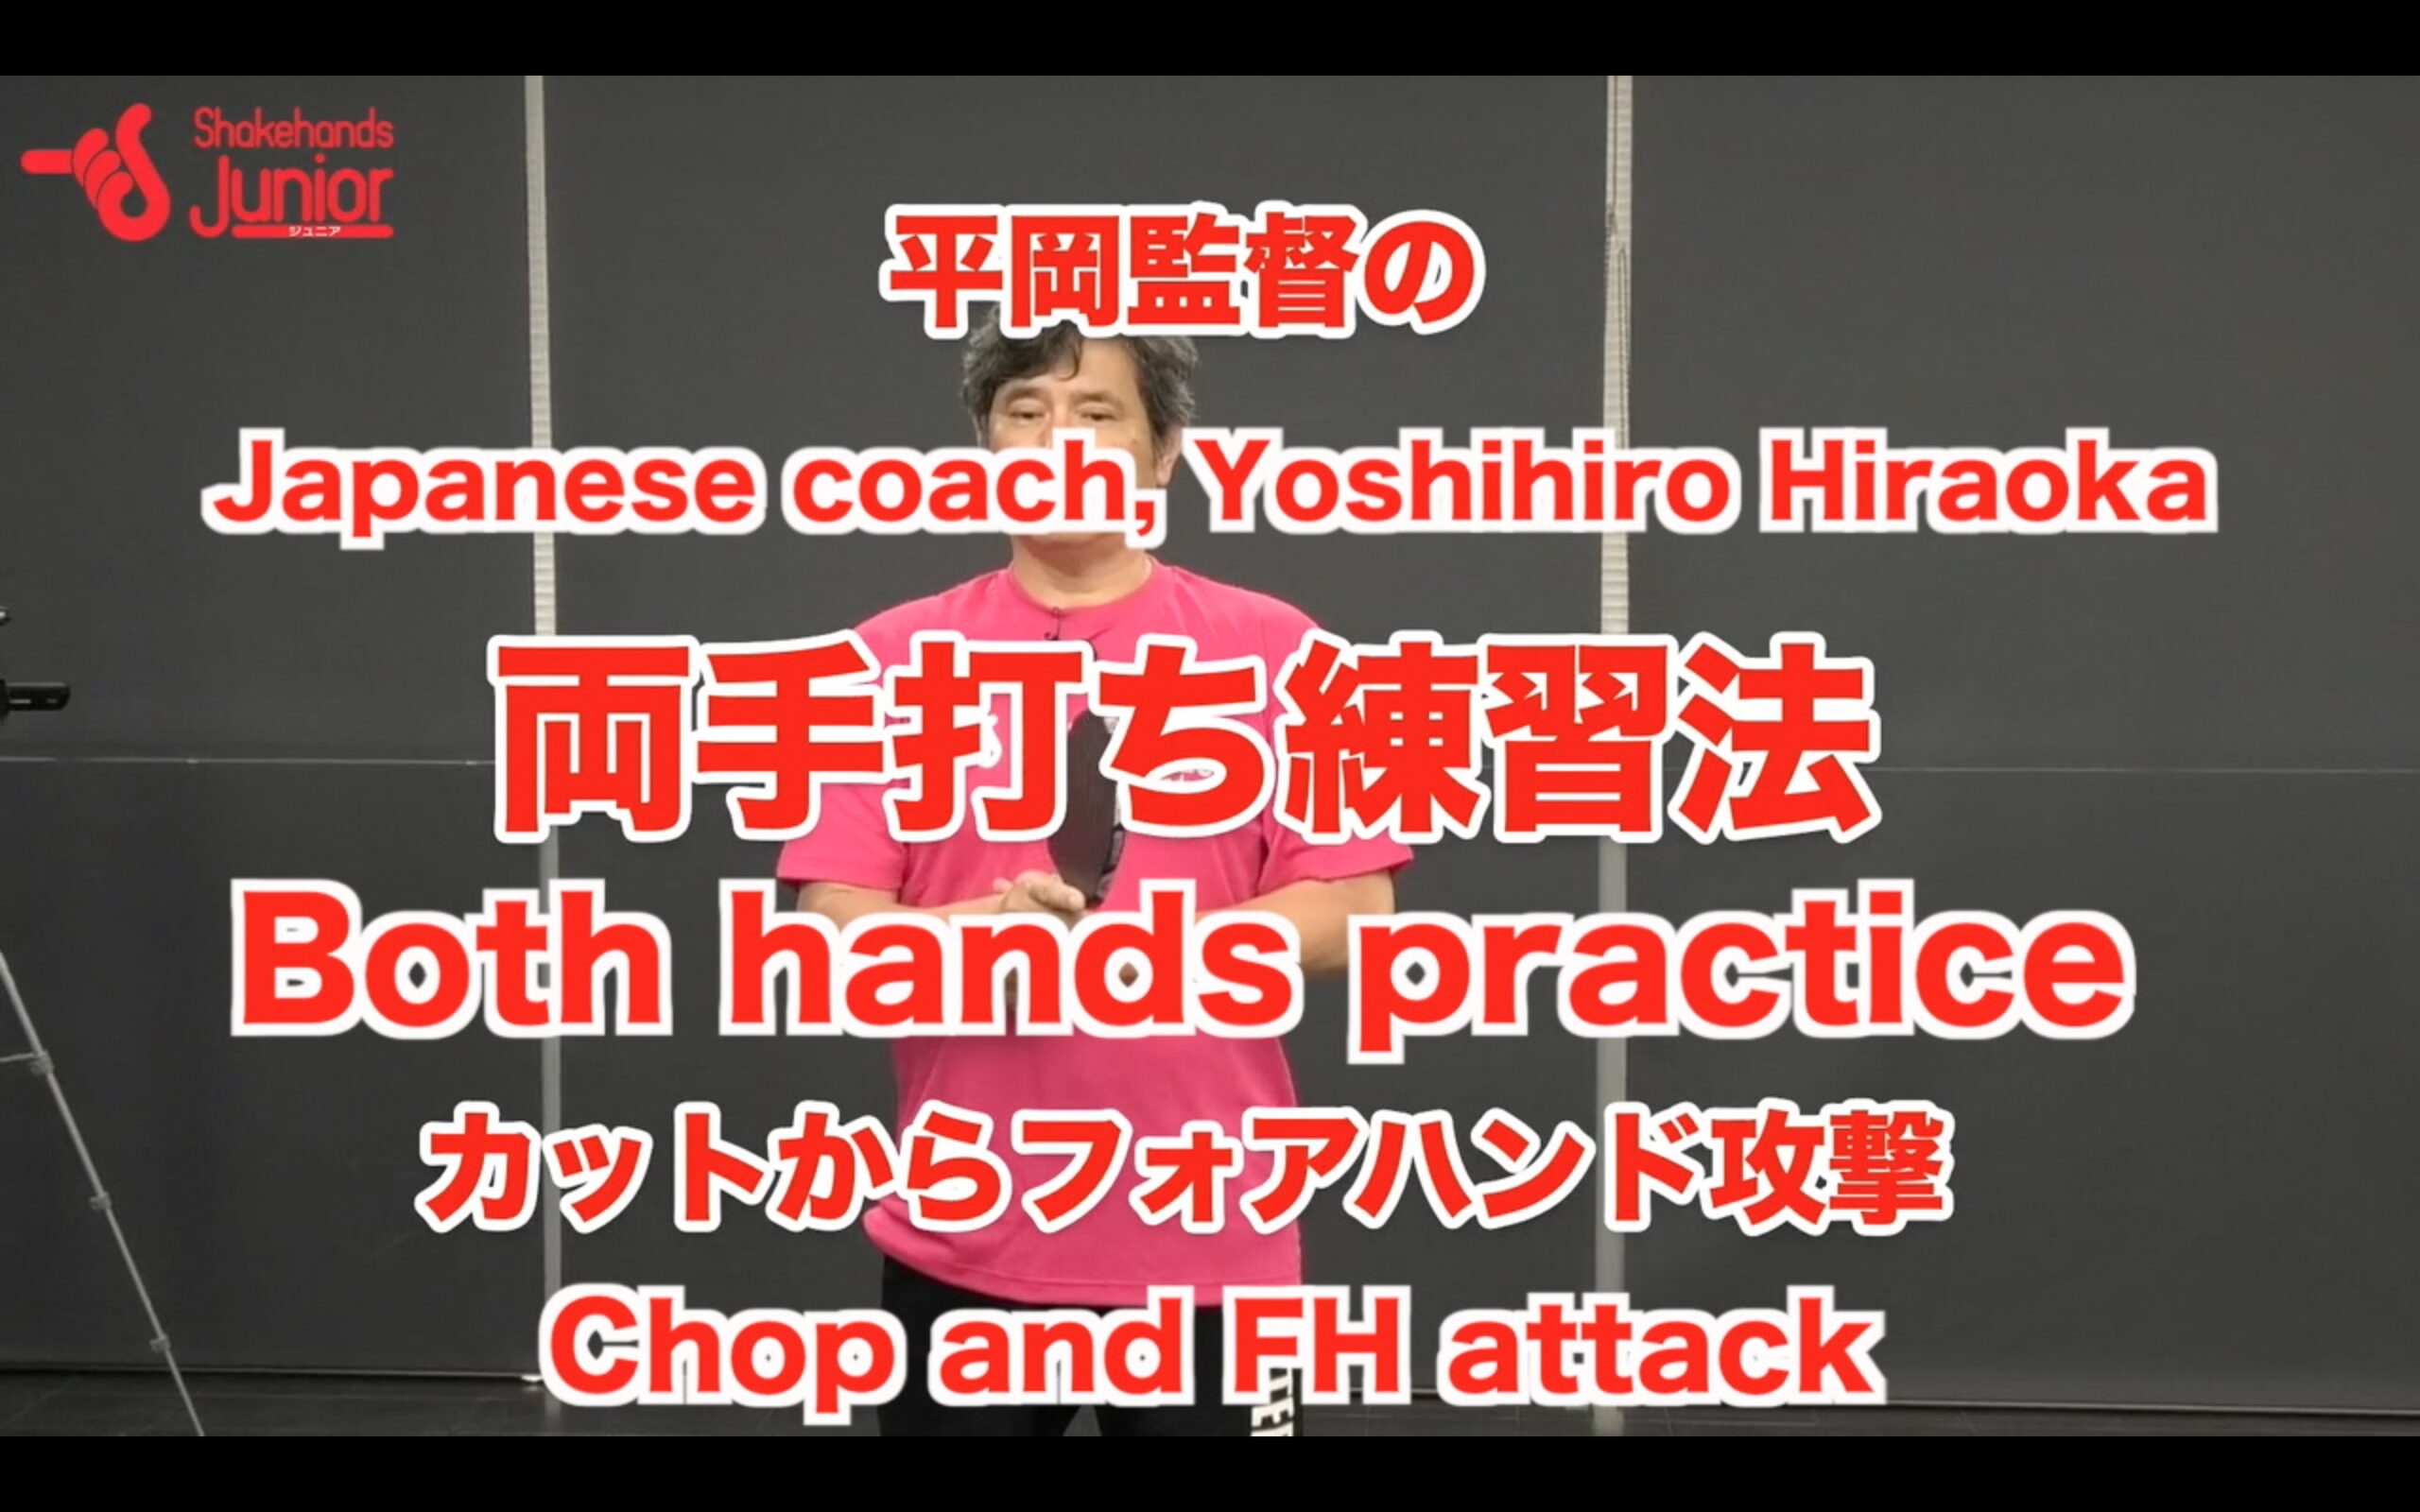 Both hands practice Chop and FH attack